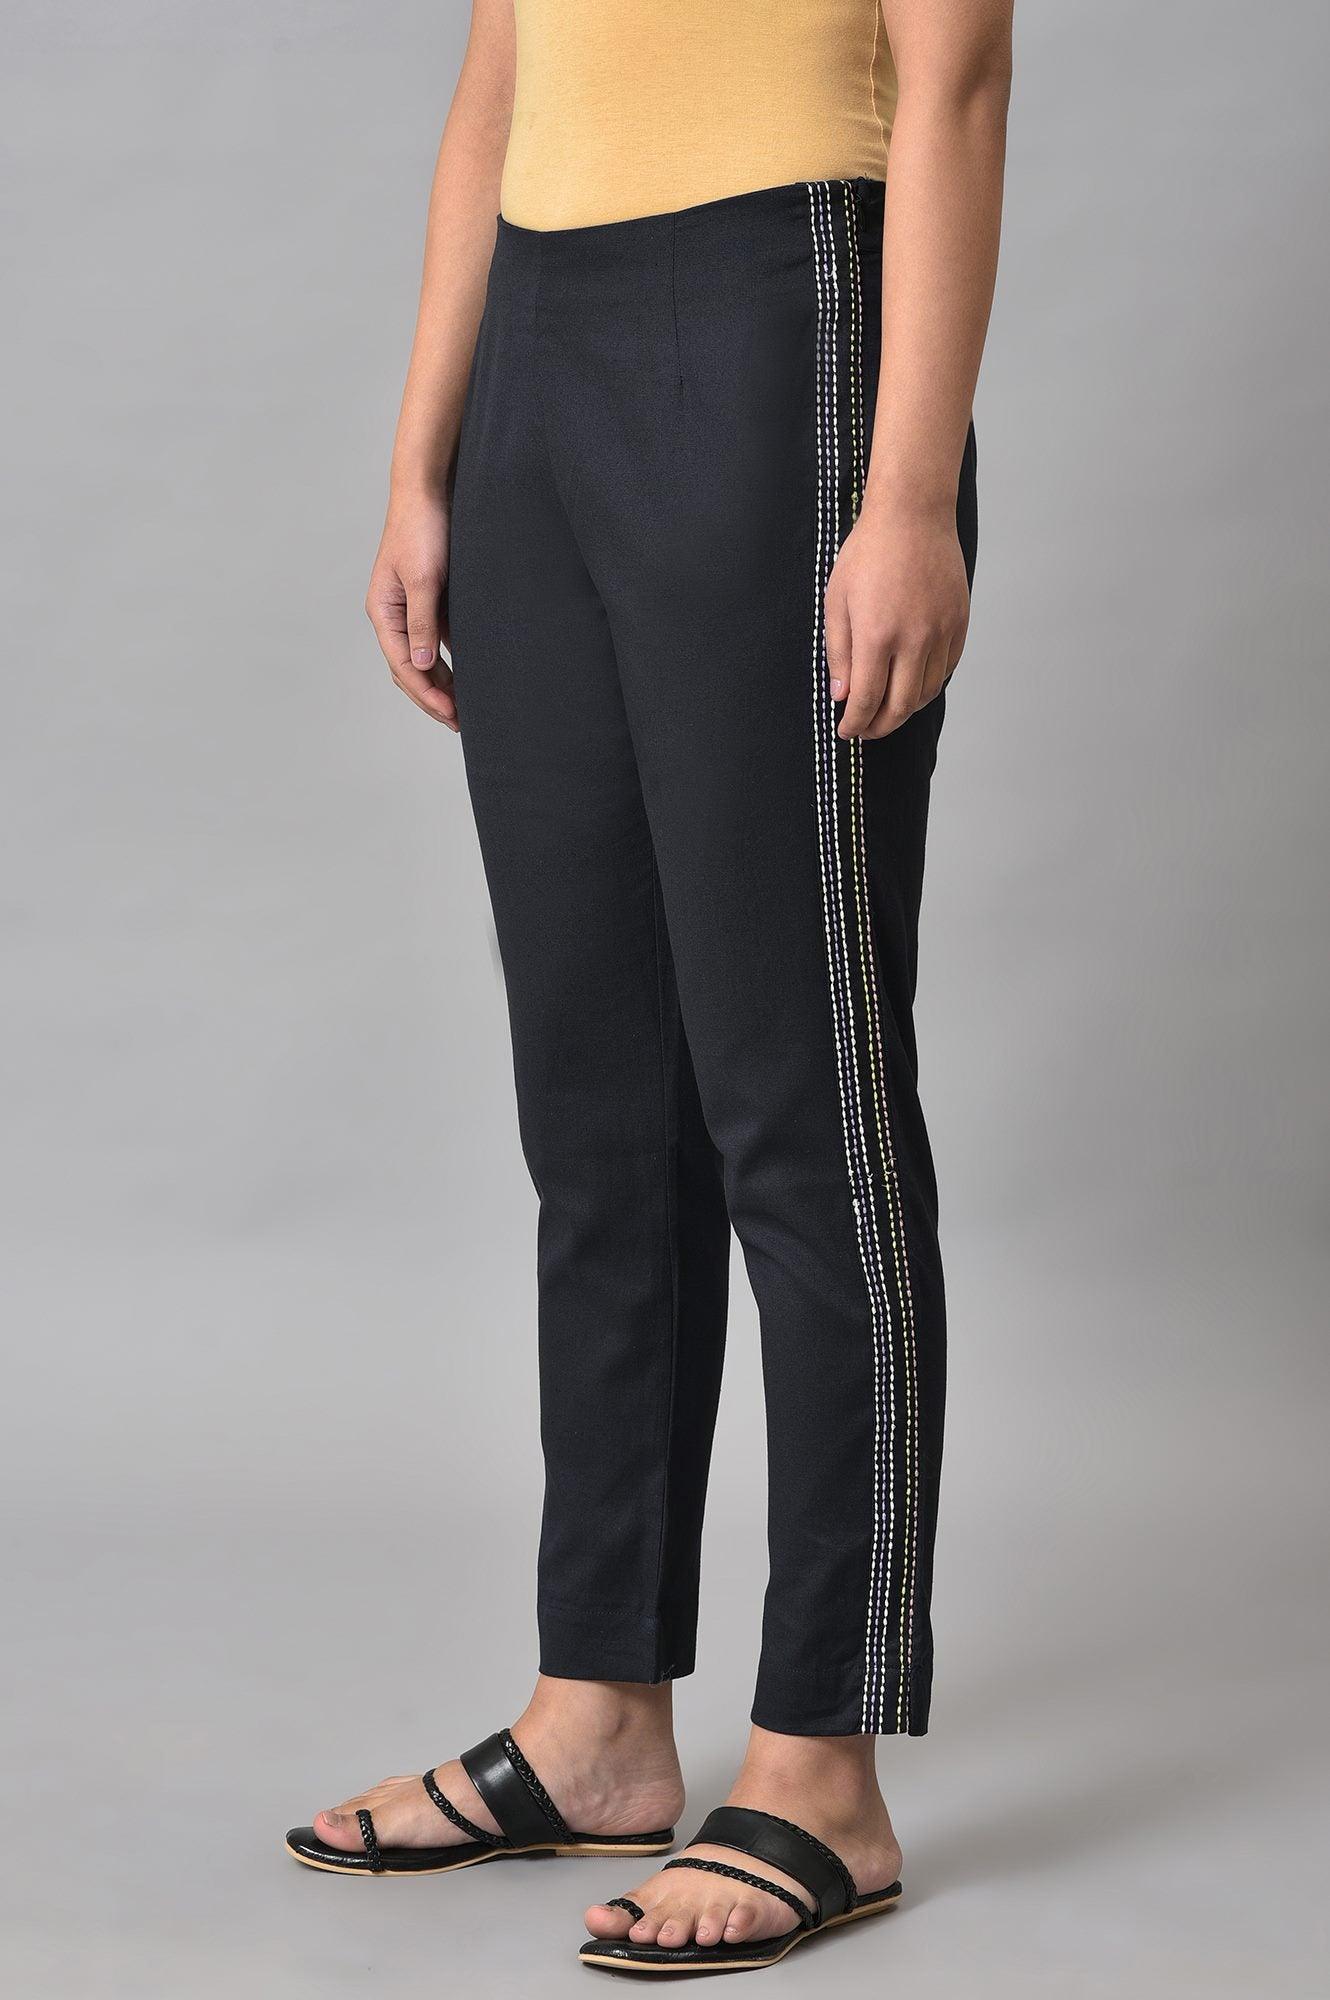 Black Parallel Pants With Side Embroidery - wforwoman